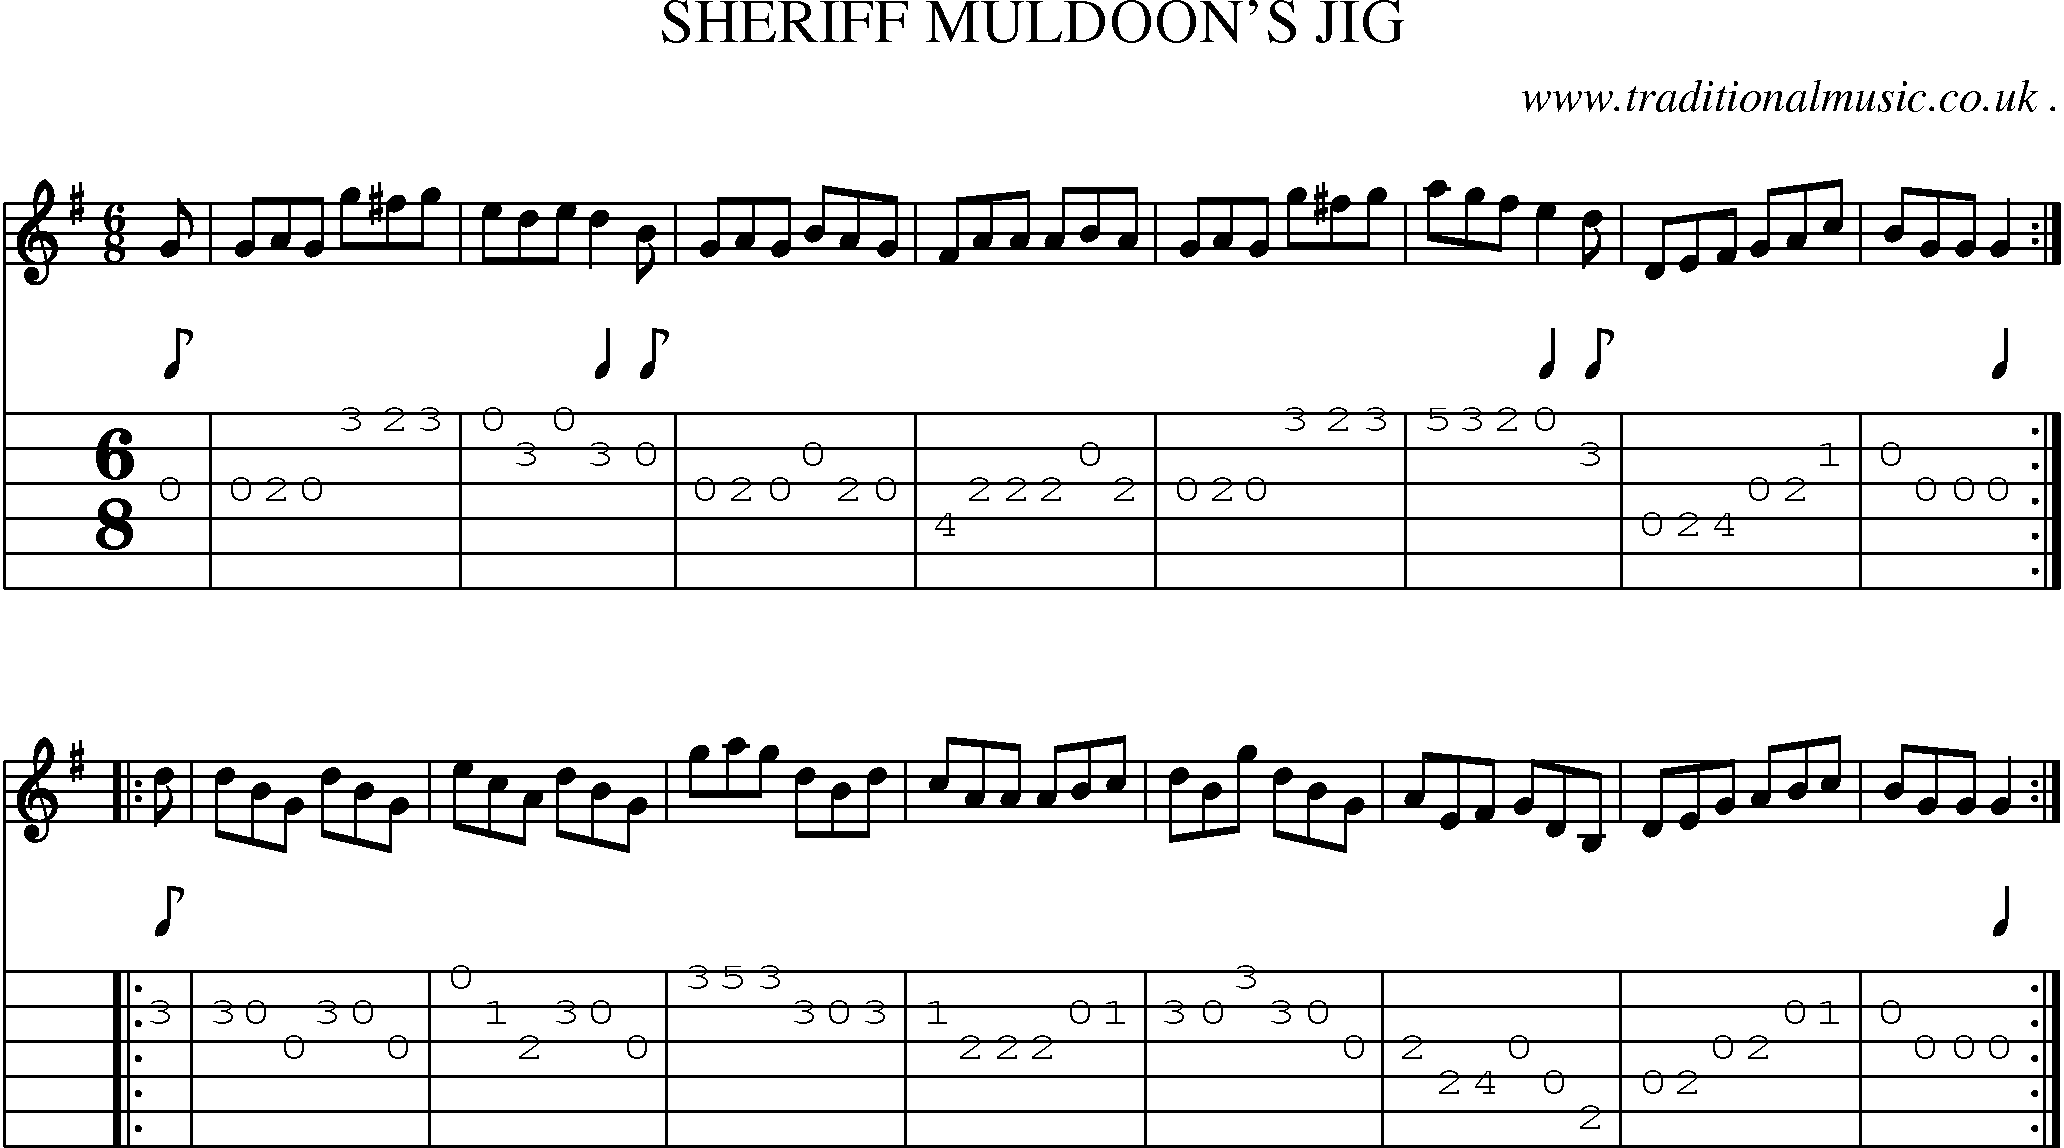 Sheet-Music and Guitar Tabs for Sheriff Muldoons Jig